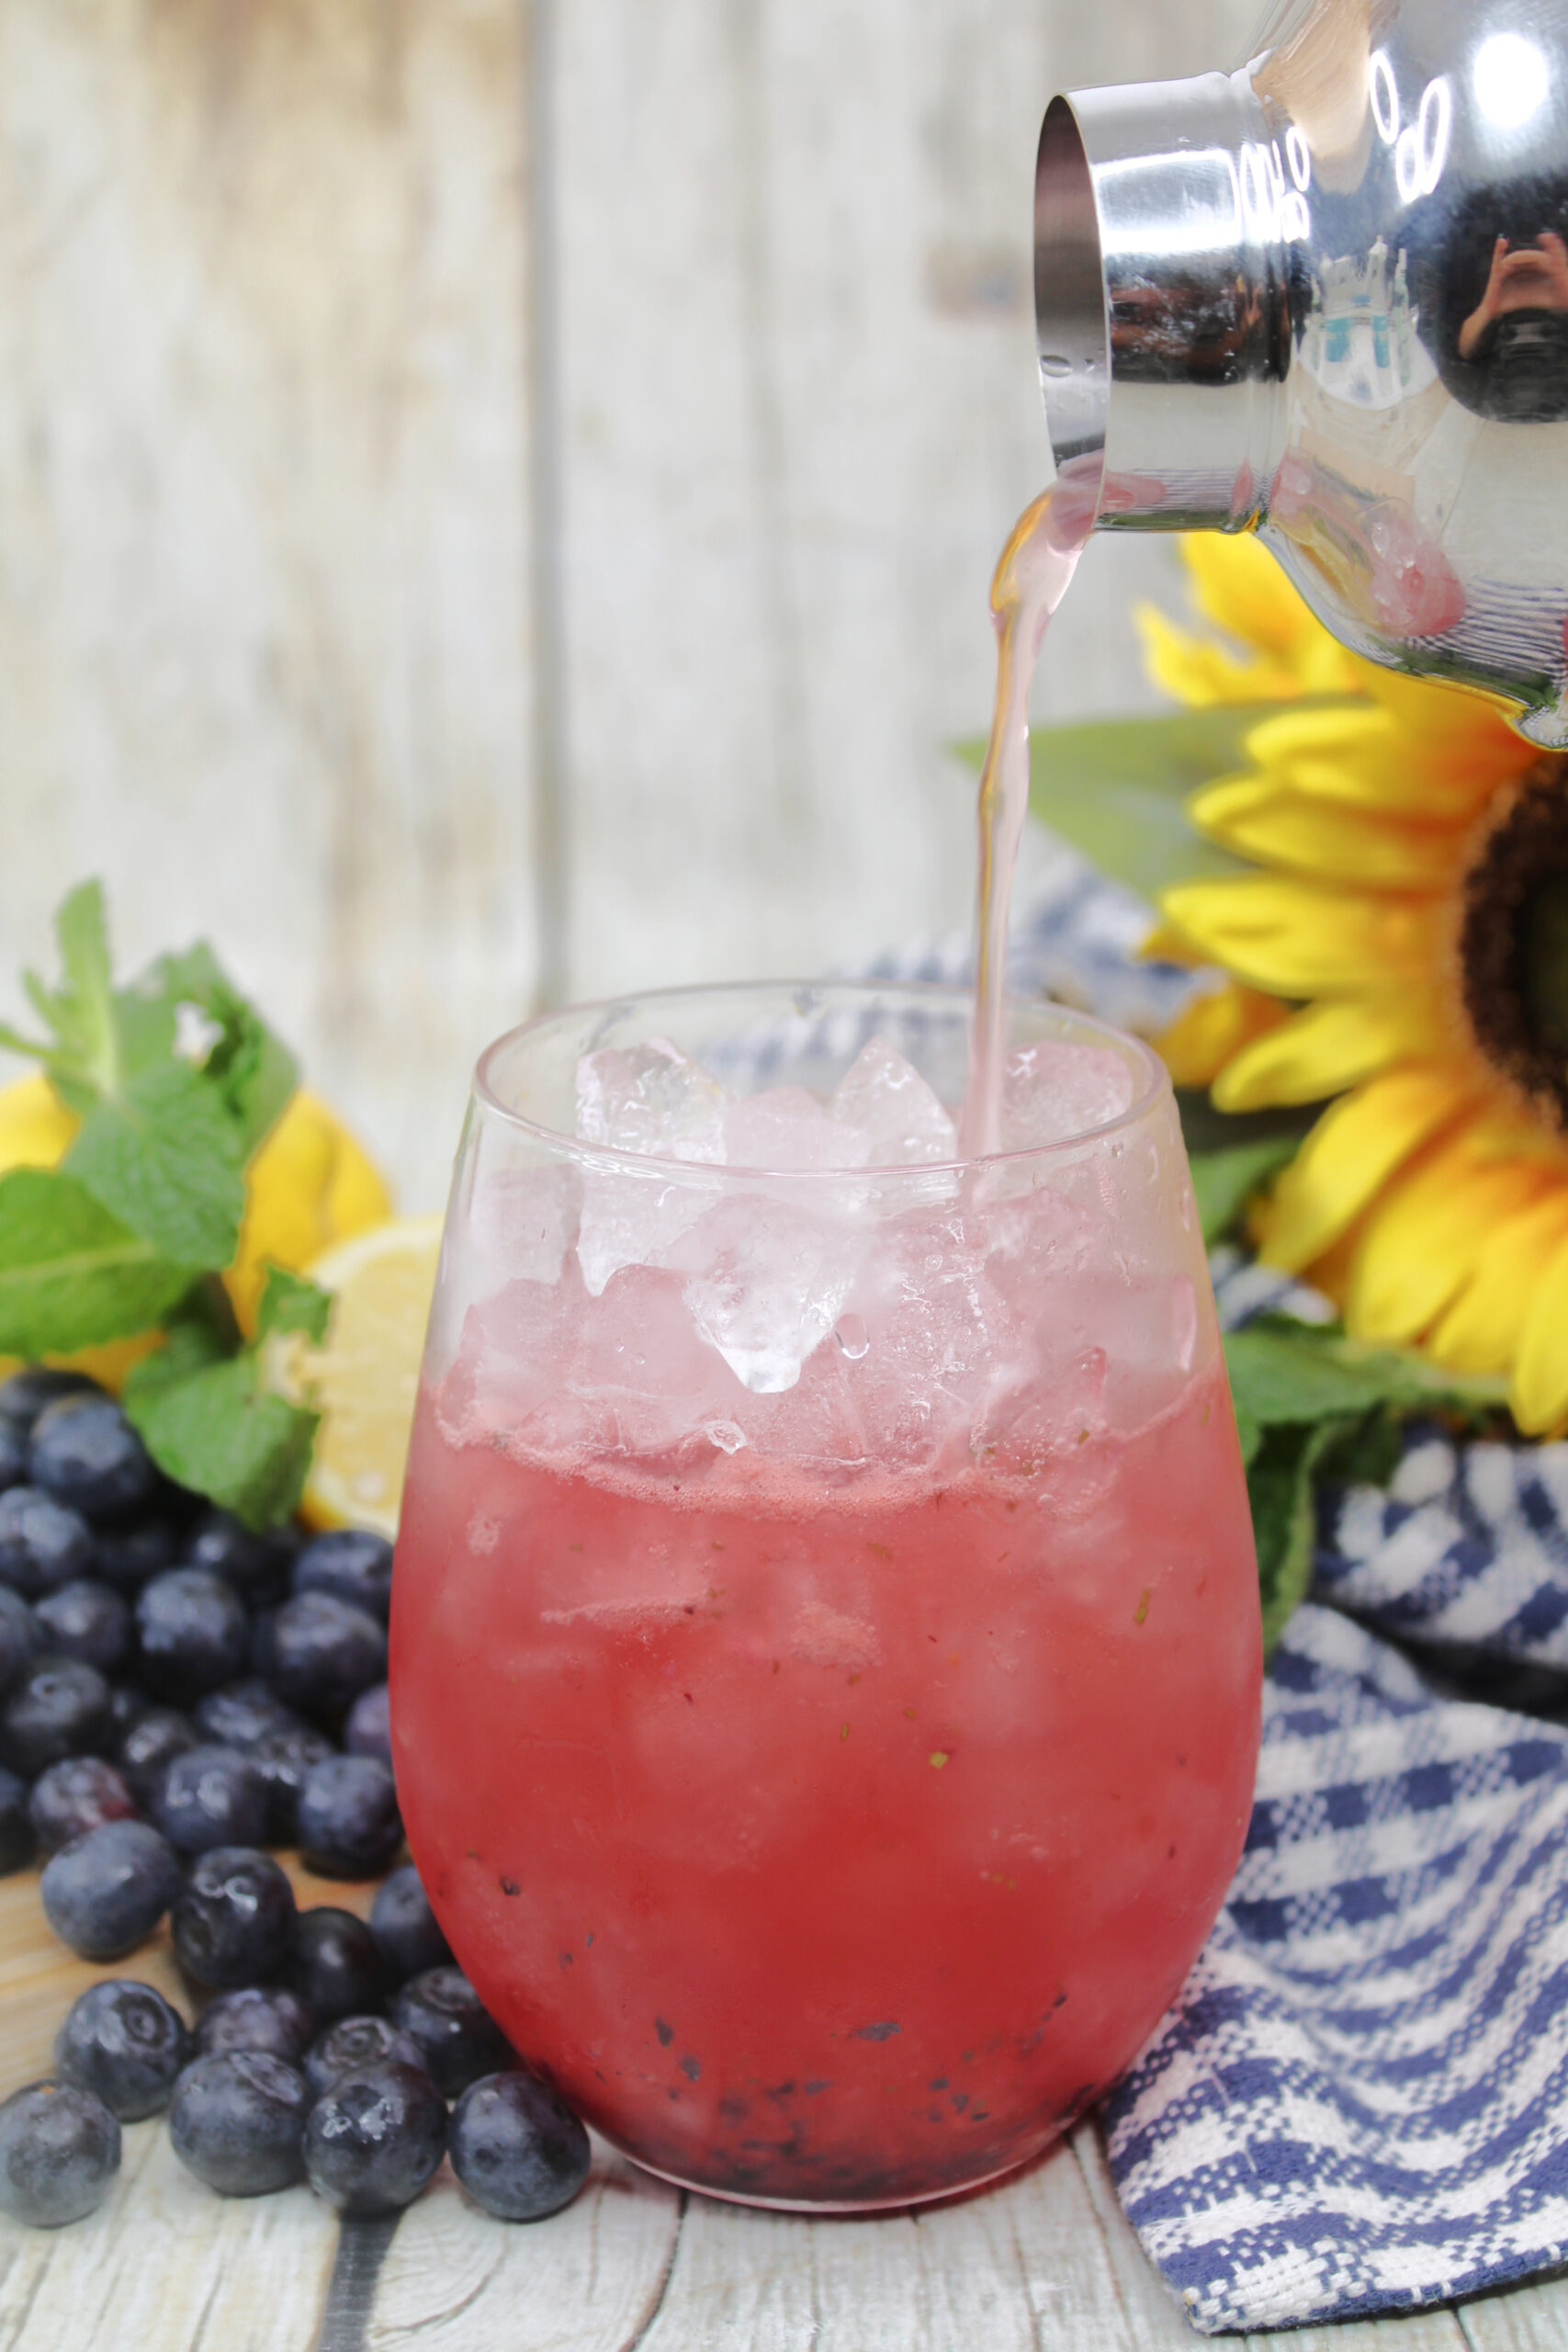 Once the blueberry puree and ice are added to the glass, top with rum and soda water.